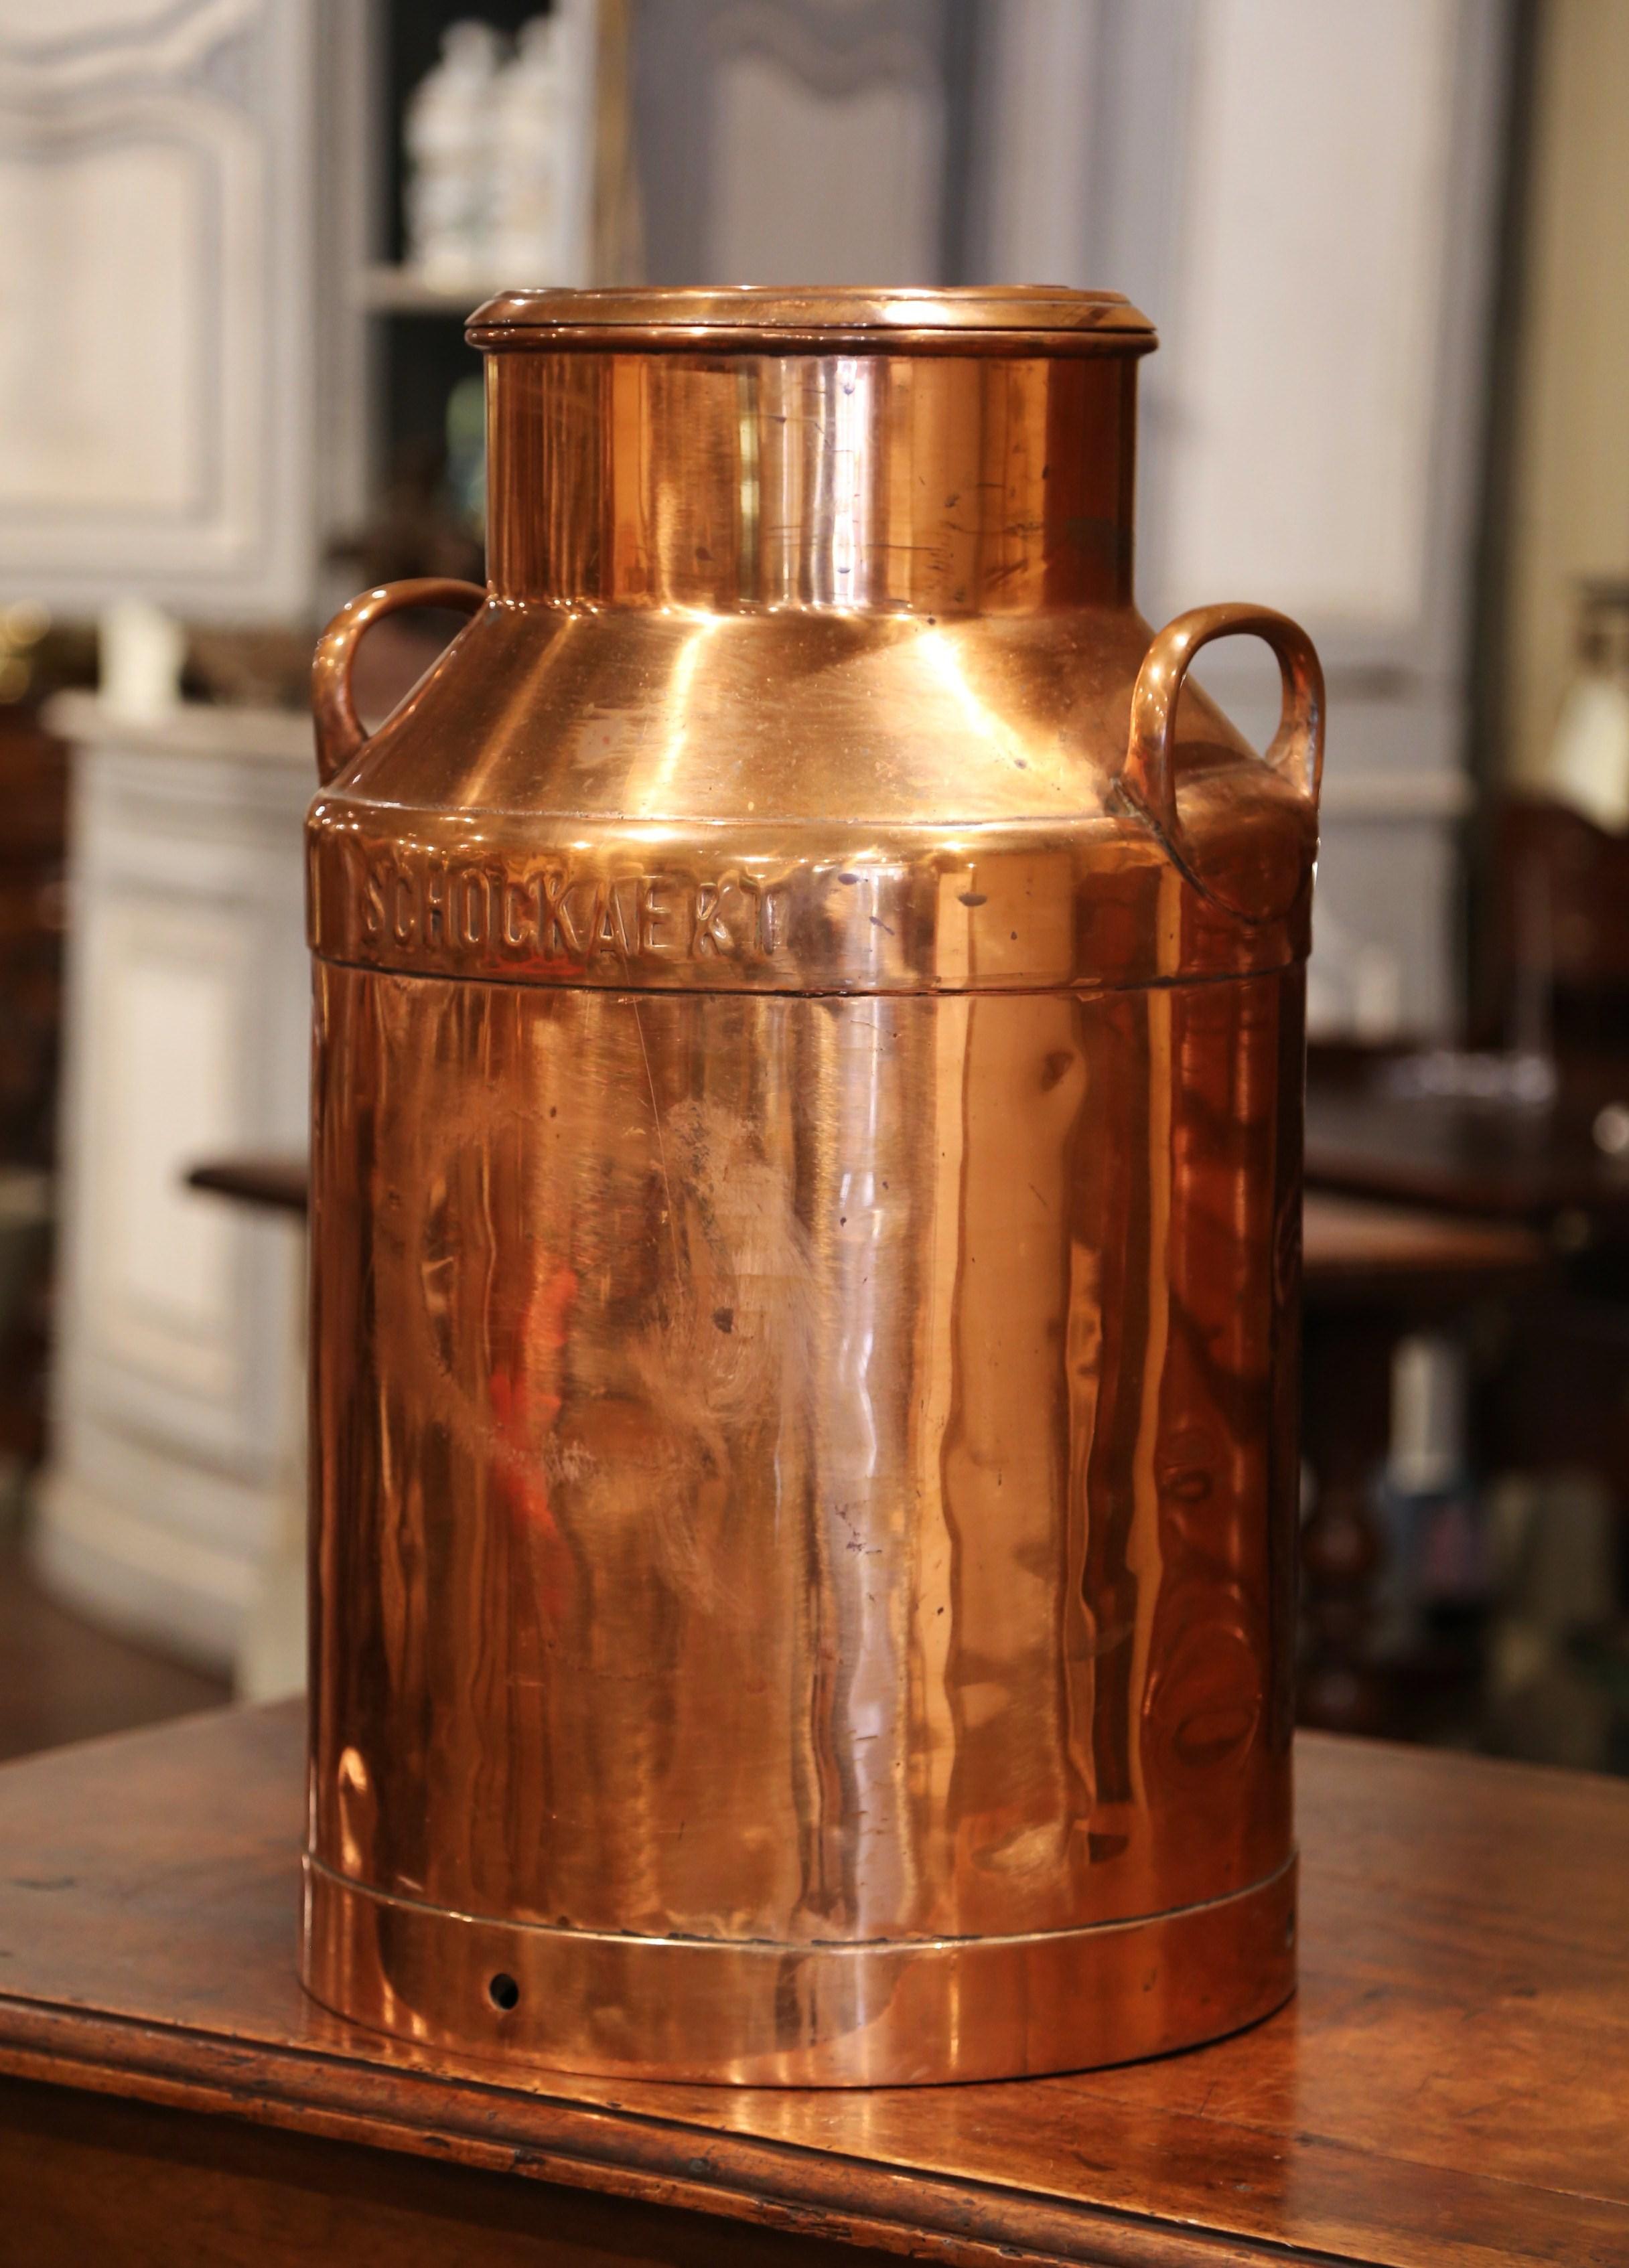 Use this beautiful antique milk can as an umbrella stand by your front door. Crafted in Belgium circa 1880, the tall metal and copper container has side handles and its original removable lid. The traditional, utilitarian piece is branded with the